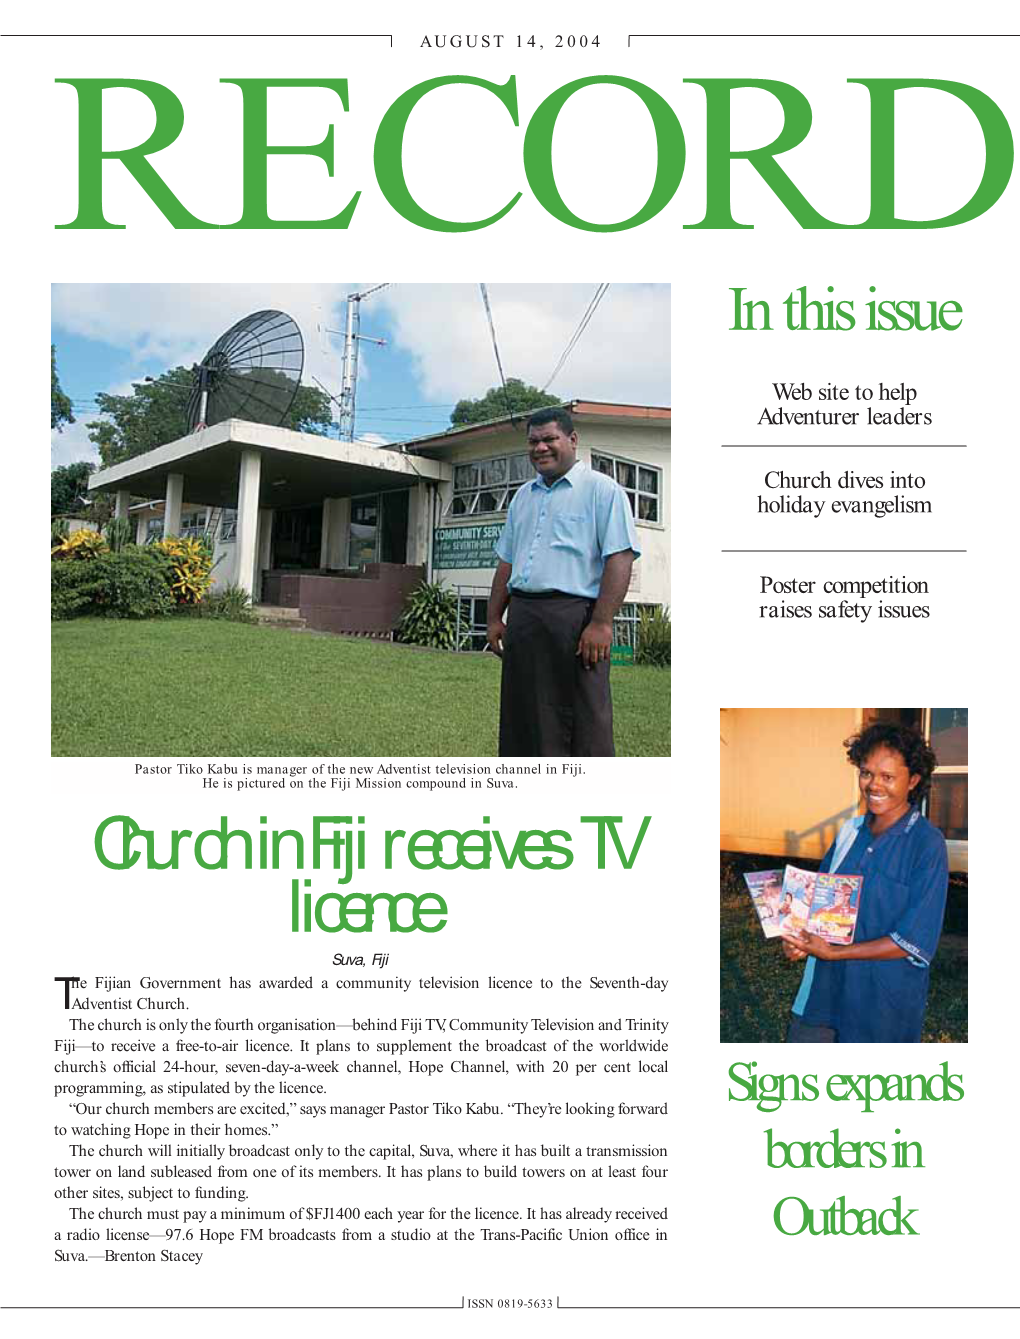 Church in Fiji Receives TV Licence Suva, Fiji He Fijian Government Has Awarded a Community Television Licence to the Seventh-Day Tadventist Church